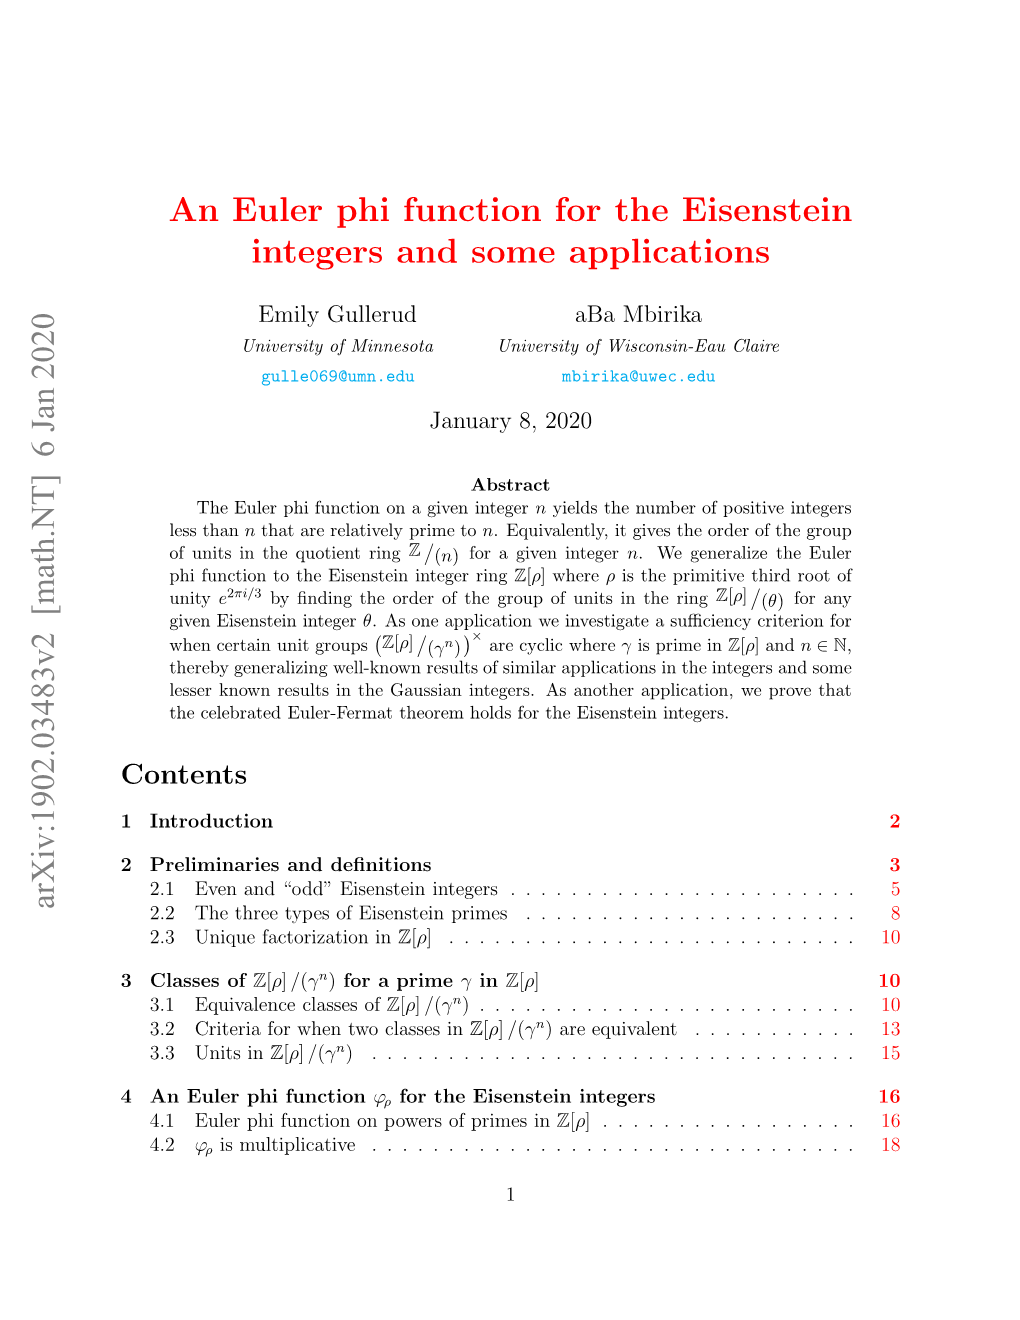 An Euler Phi Function for the Eisenstein Integers and Some Applications